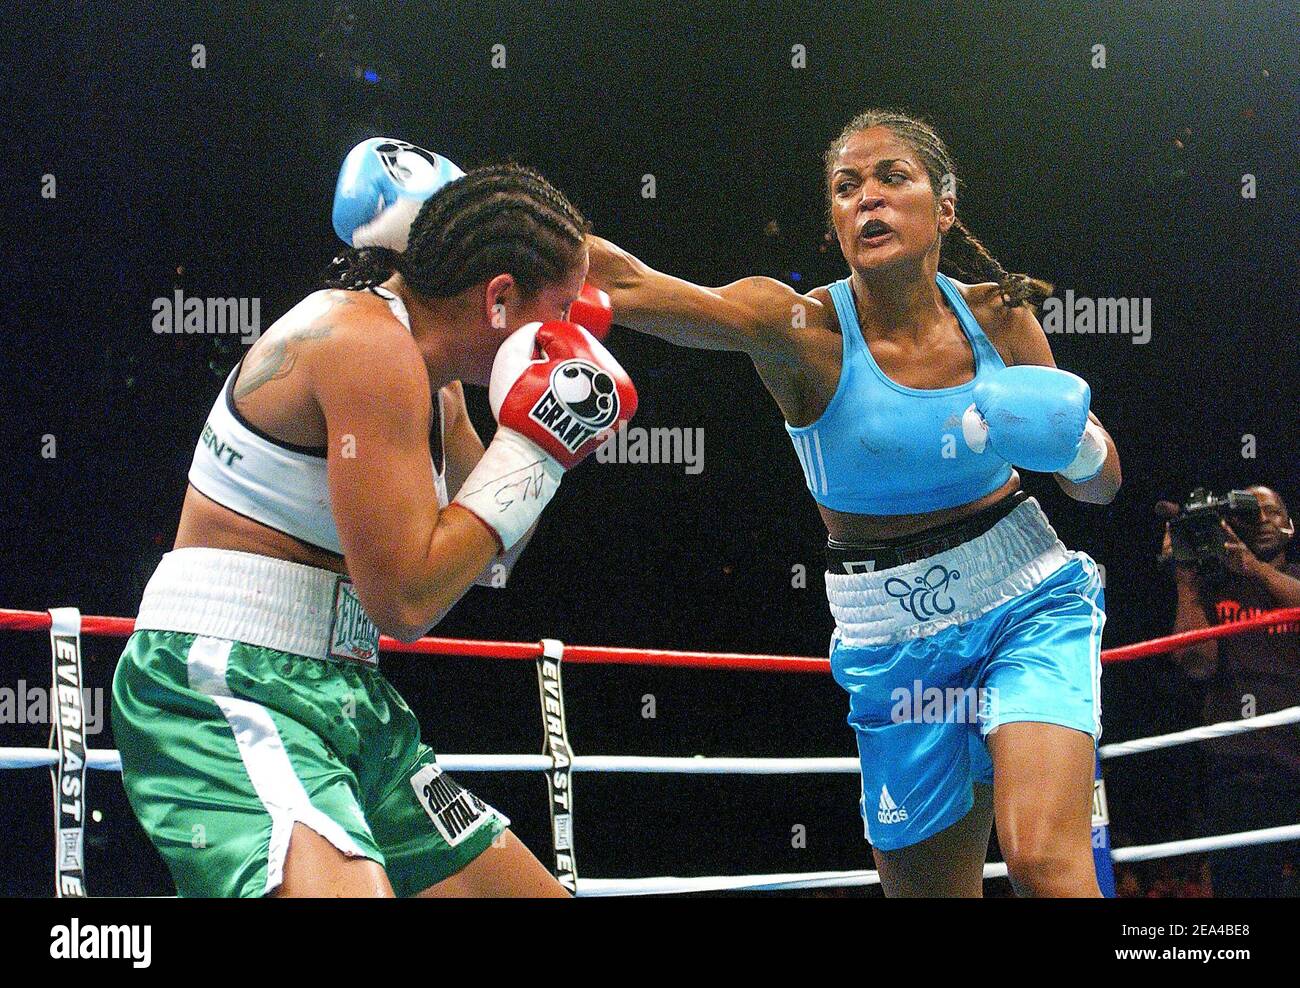 World Boxing Champion Laila Ali celebrates her victory on June 11, 2005, in Washington, DC after a 3 round TKO against Erin Toughill for the WBC/WIBA Super Middleweight Championship Bout. Photo by Olivier Douliery/ABACA. Stock Photo